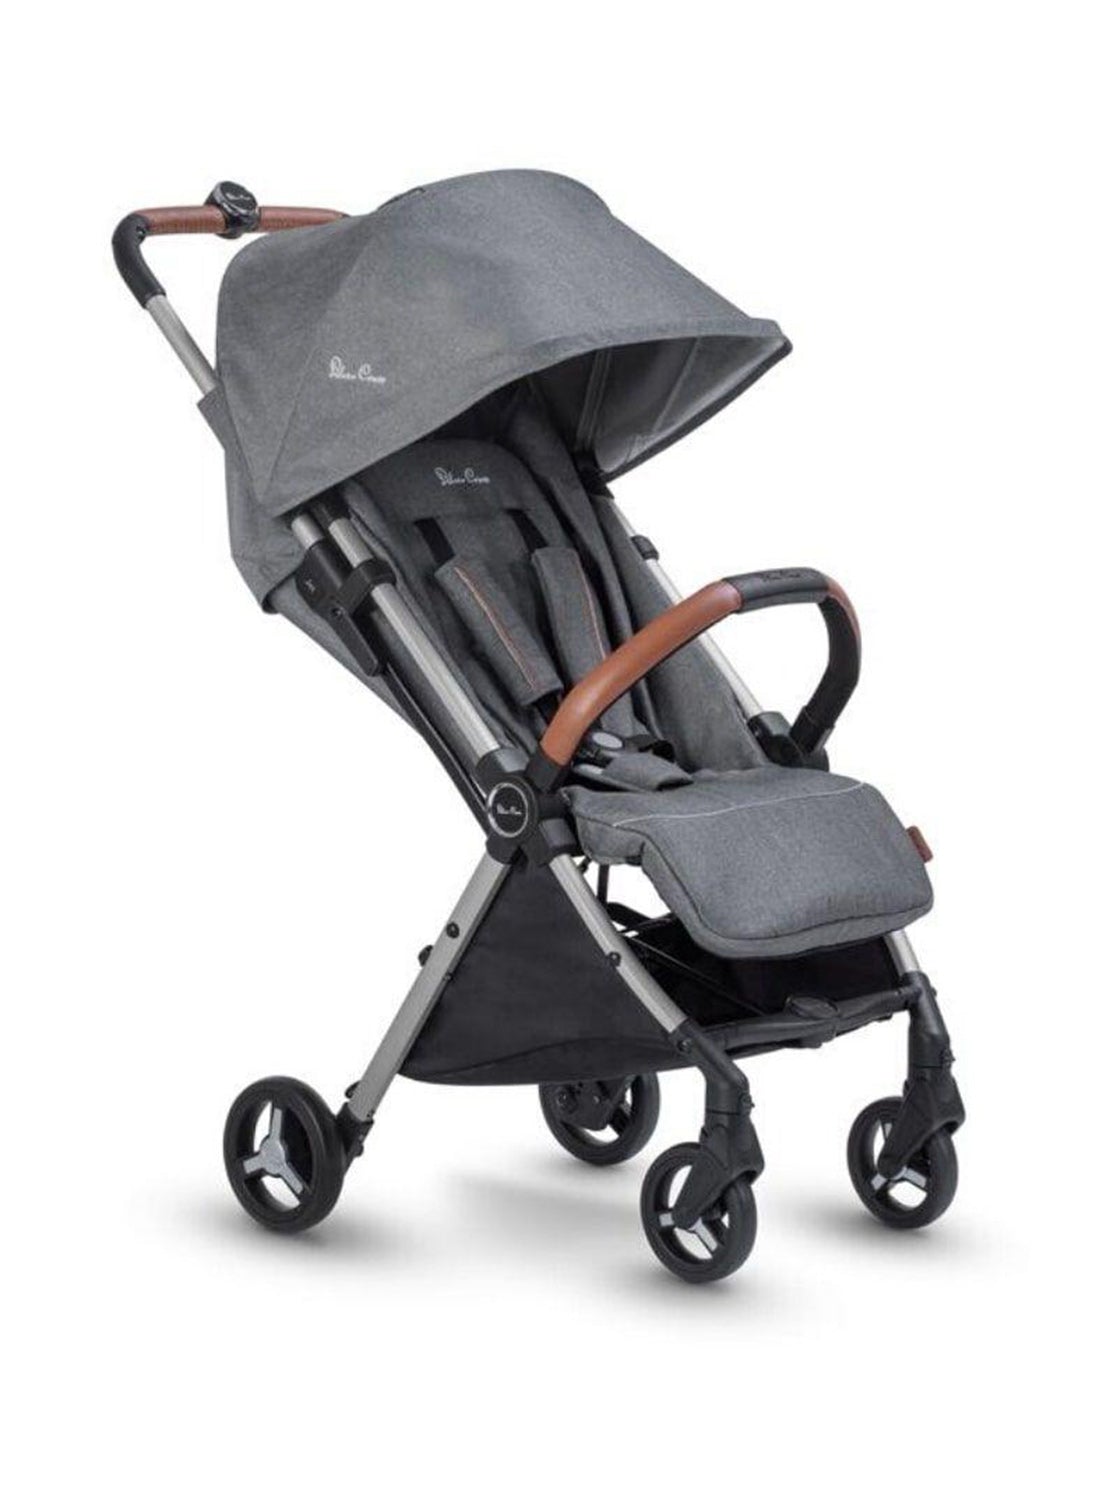 SILVER CROSS Jet Super Compact Stroller Special Edition, Ocean, -- ANB Baby